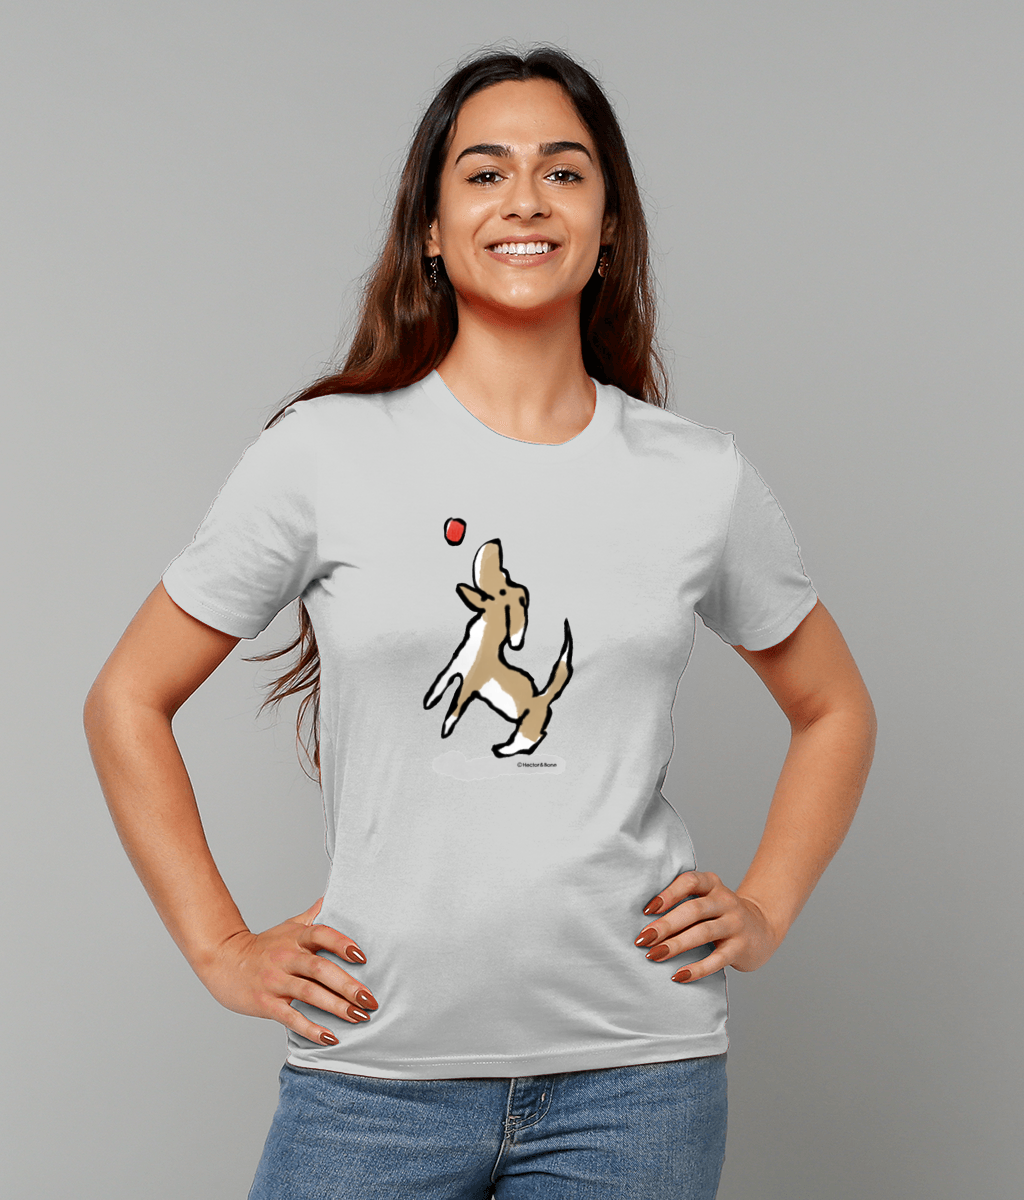 Dog T-shirt - Young woman wearing an illustrated Jumping Dog T-shirt on heather grey vegan cotton by Hector and Bone